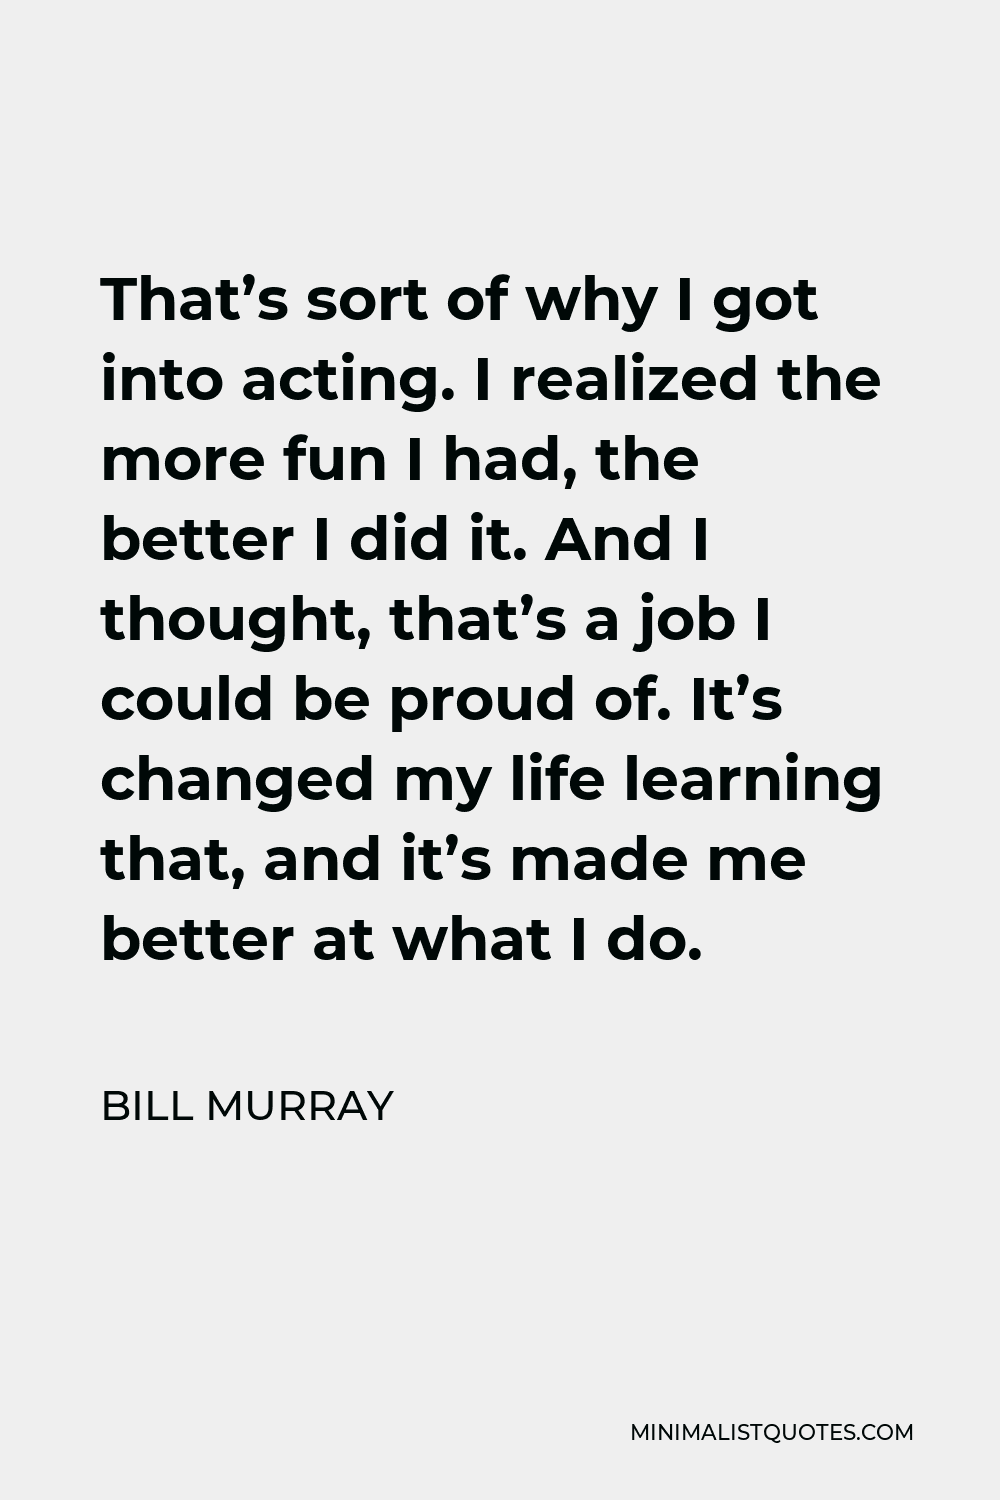 Bill Murray Quote - That’s sort of why I got into acting. I realized the more fun I had, the better I did it. And I thought, that’s a job I could be proud of. It’s changed my life learning that, and it’s made me better at what I do.